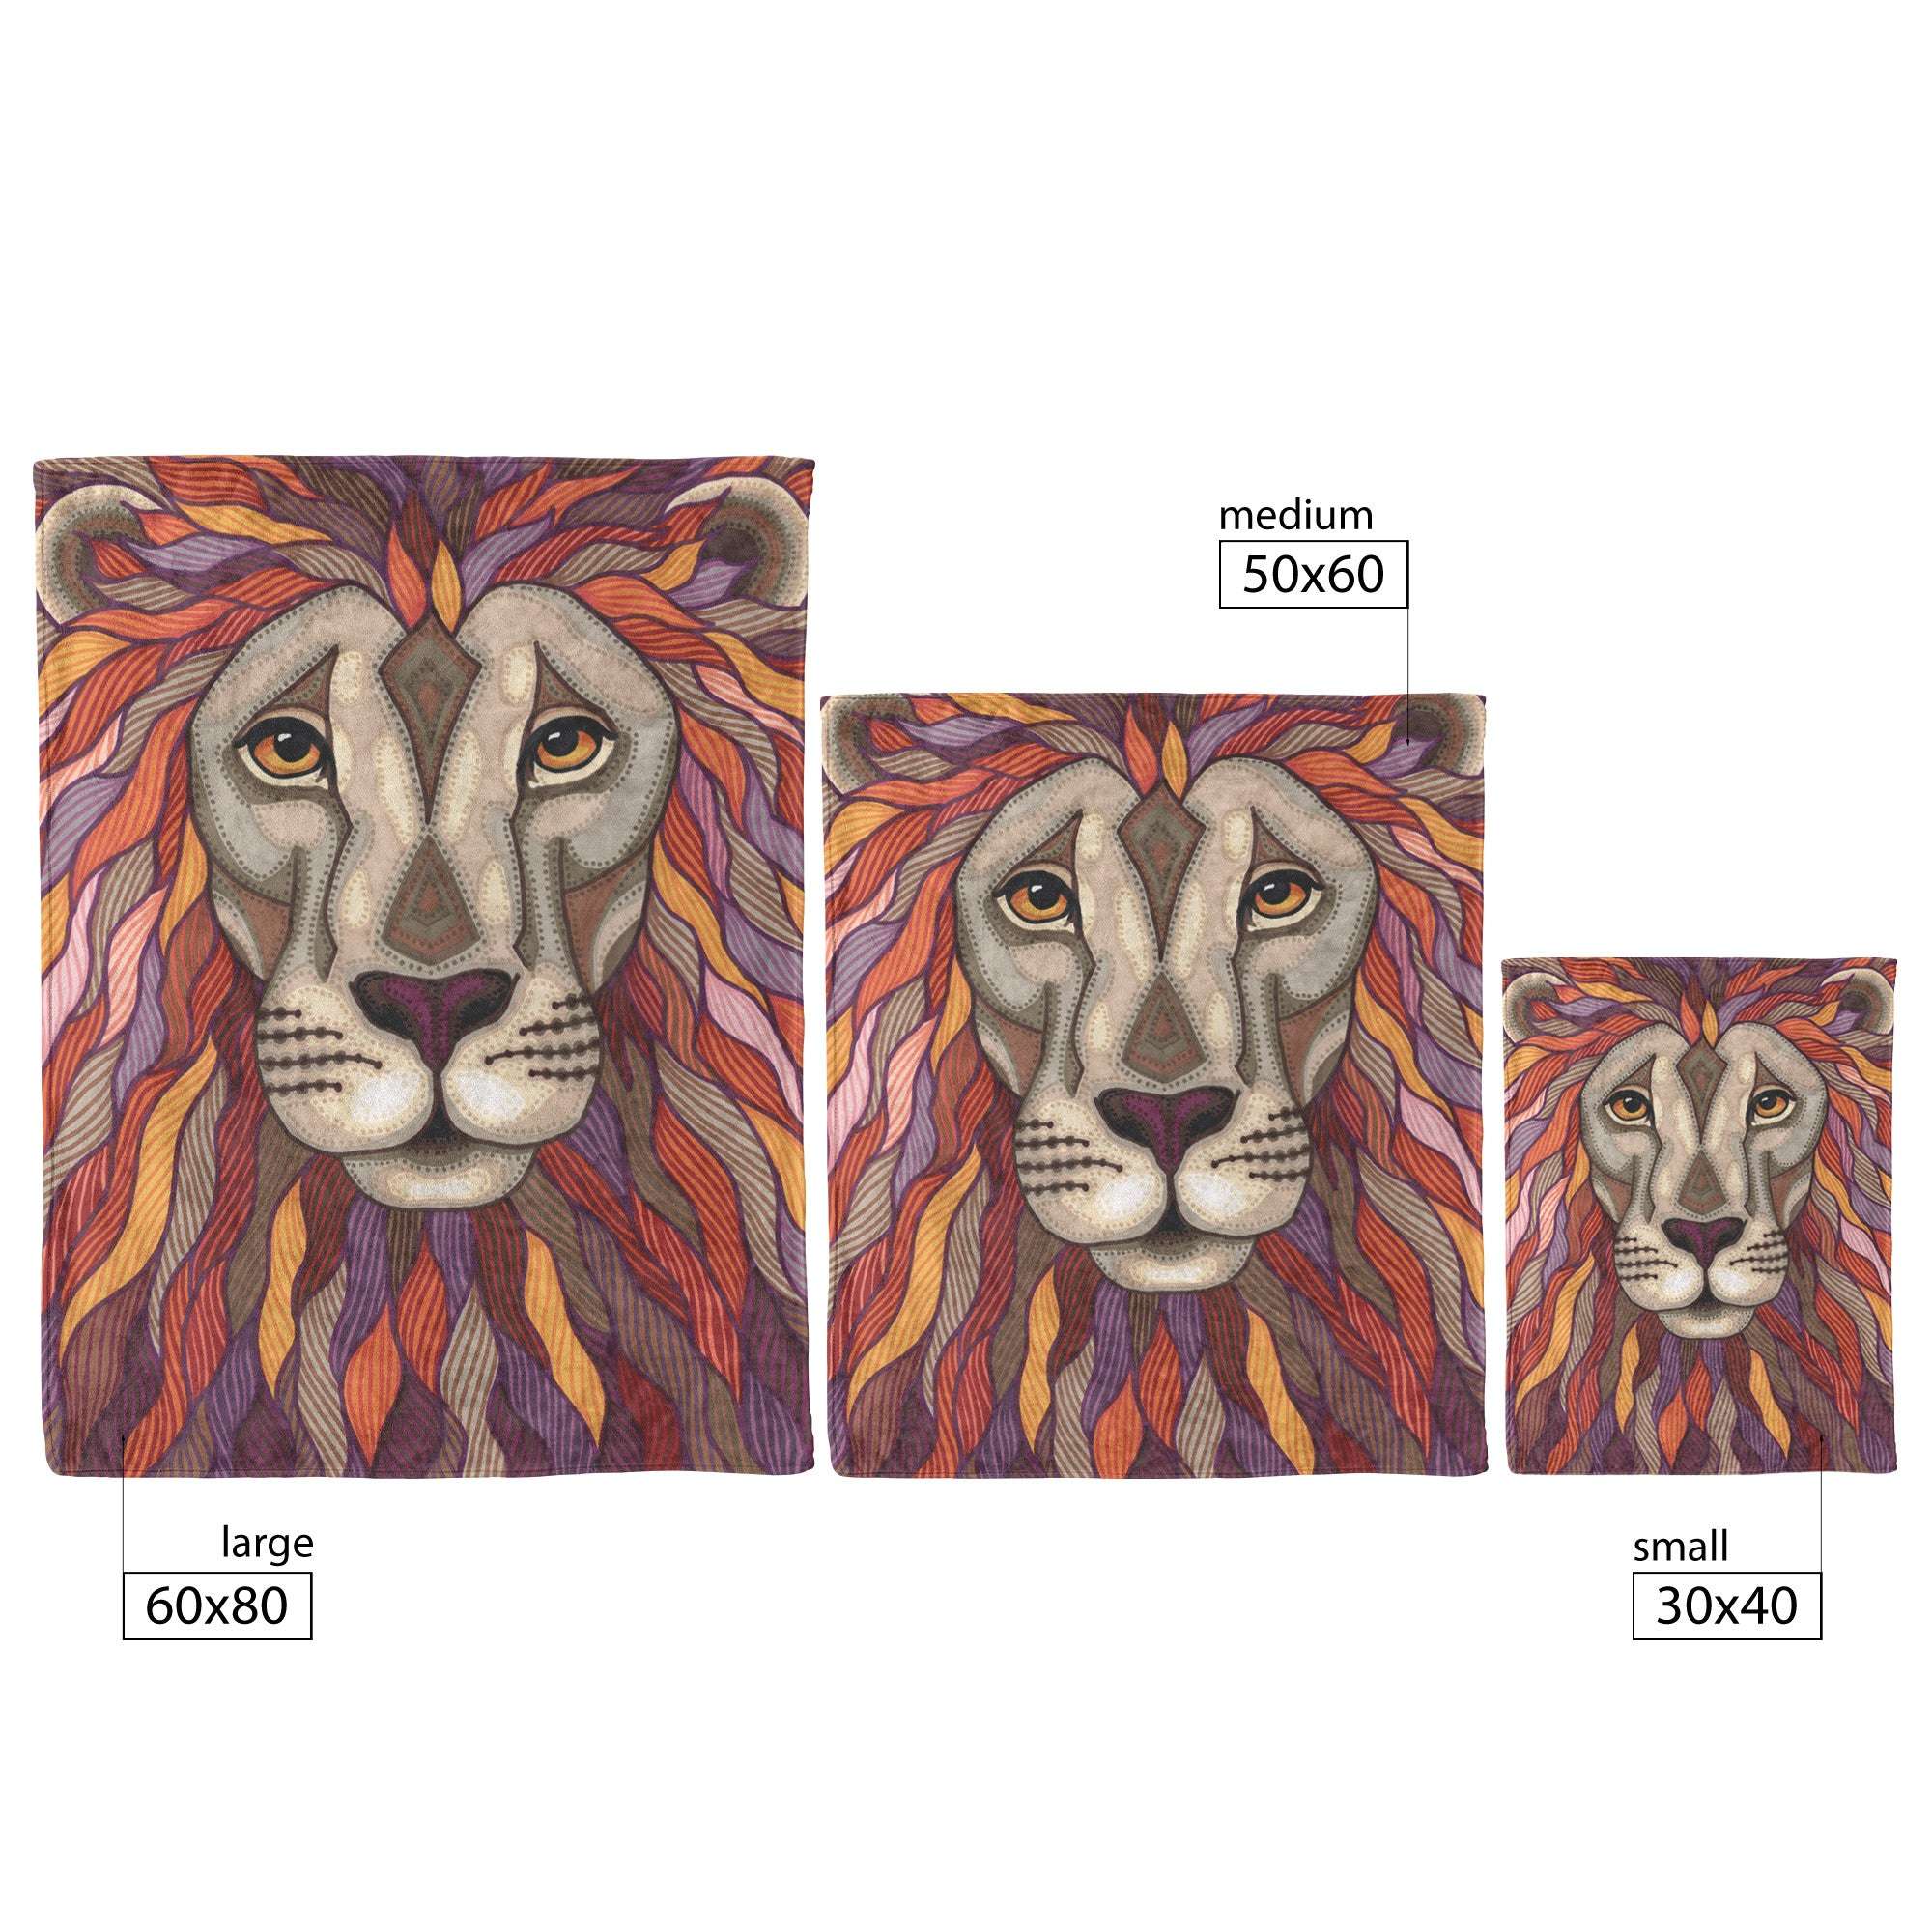 Three decorative Lion Pride Blankets featuring a lion's face with colorful, stylized mane, displayed in three sizes: large, medium, and small.